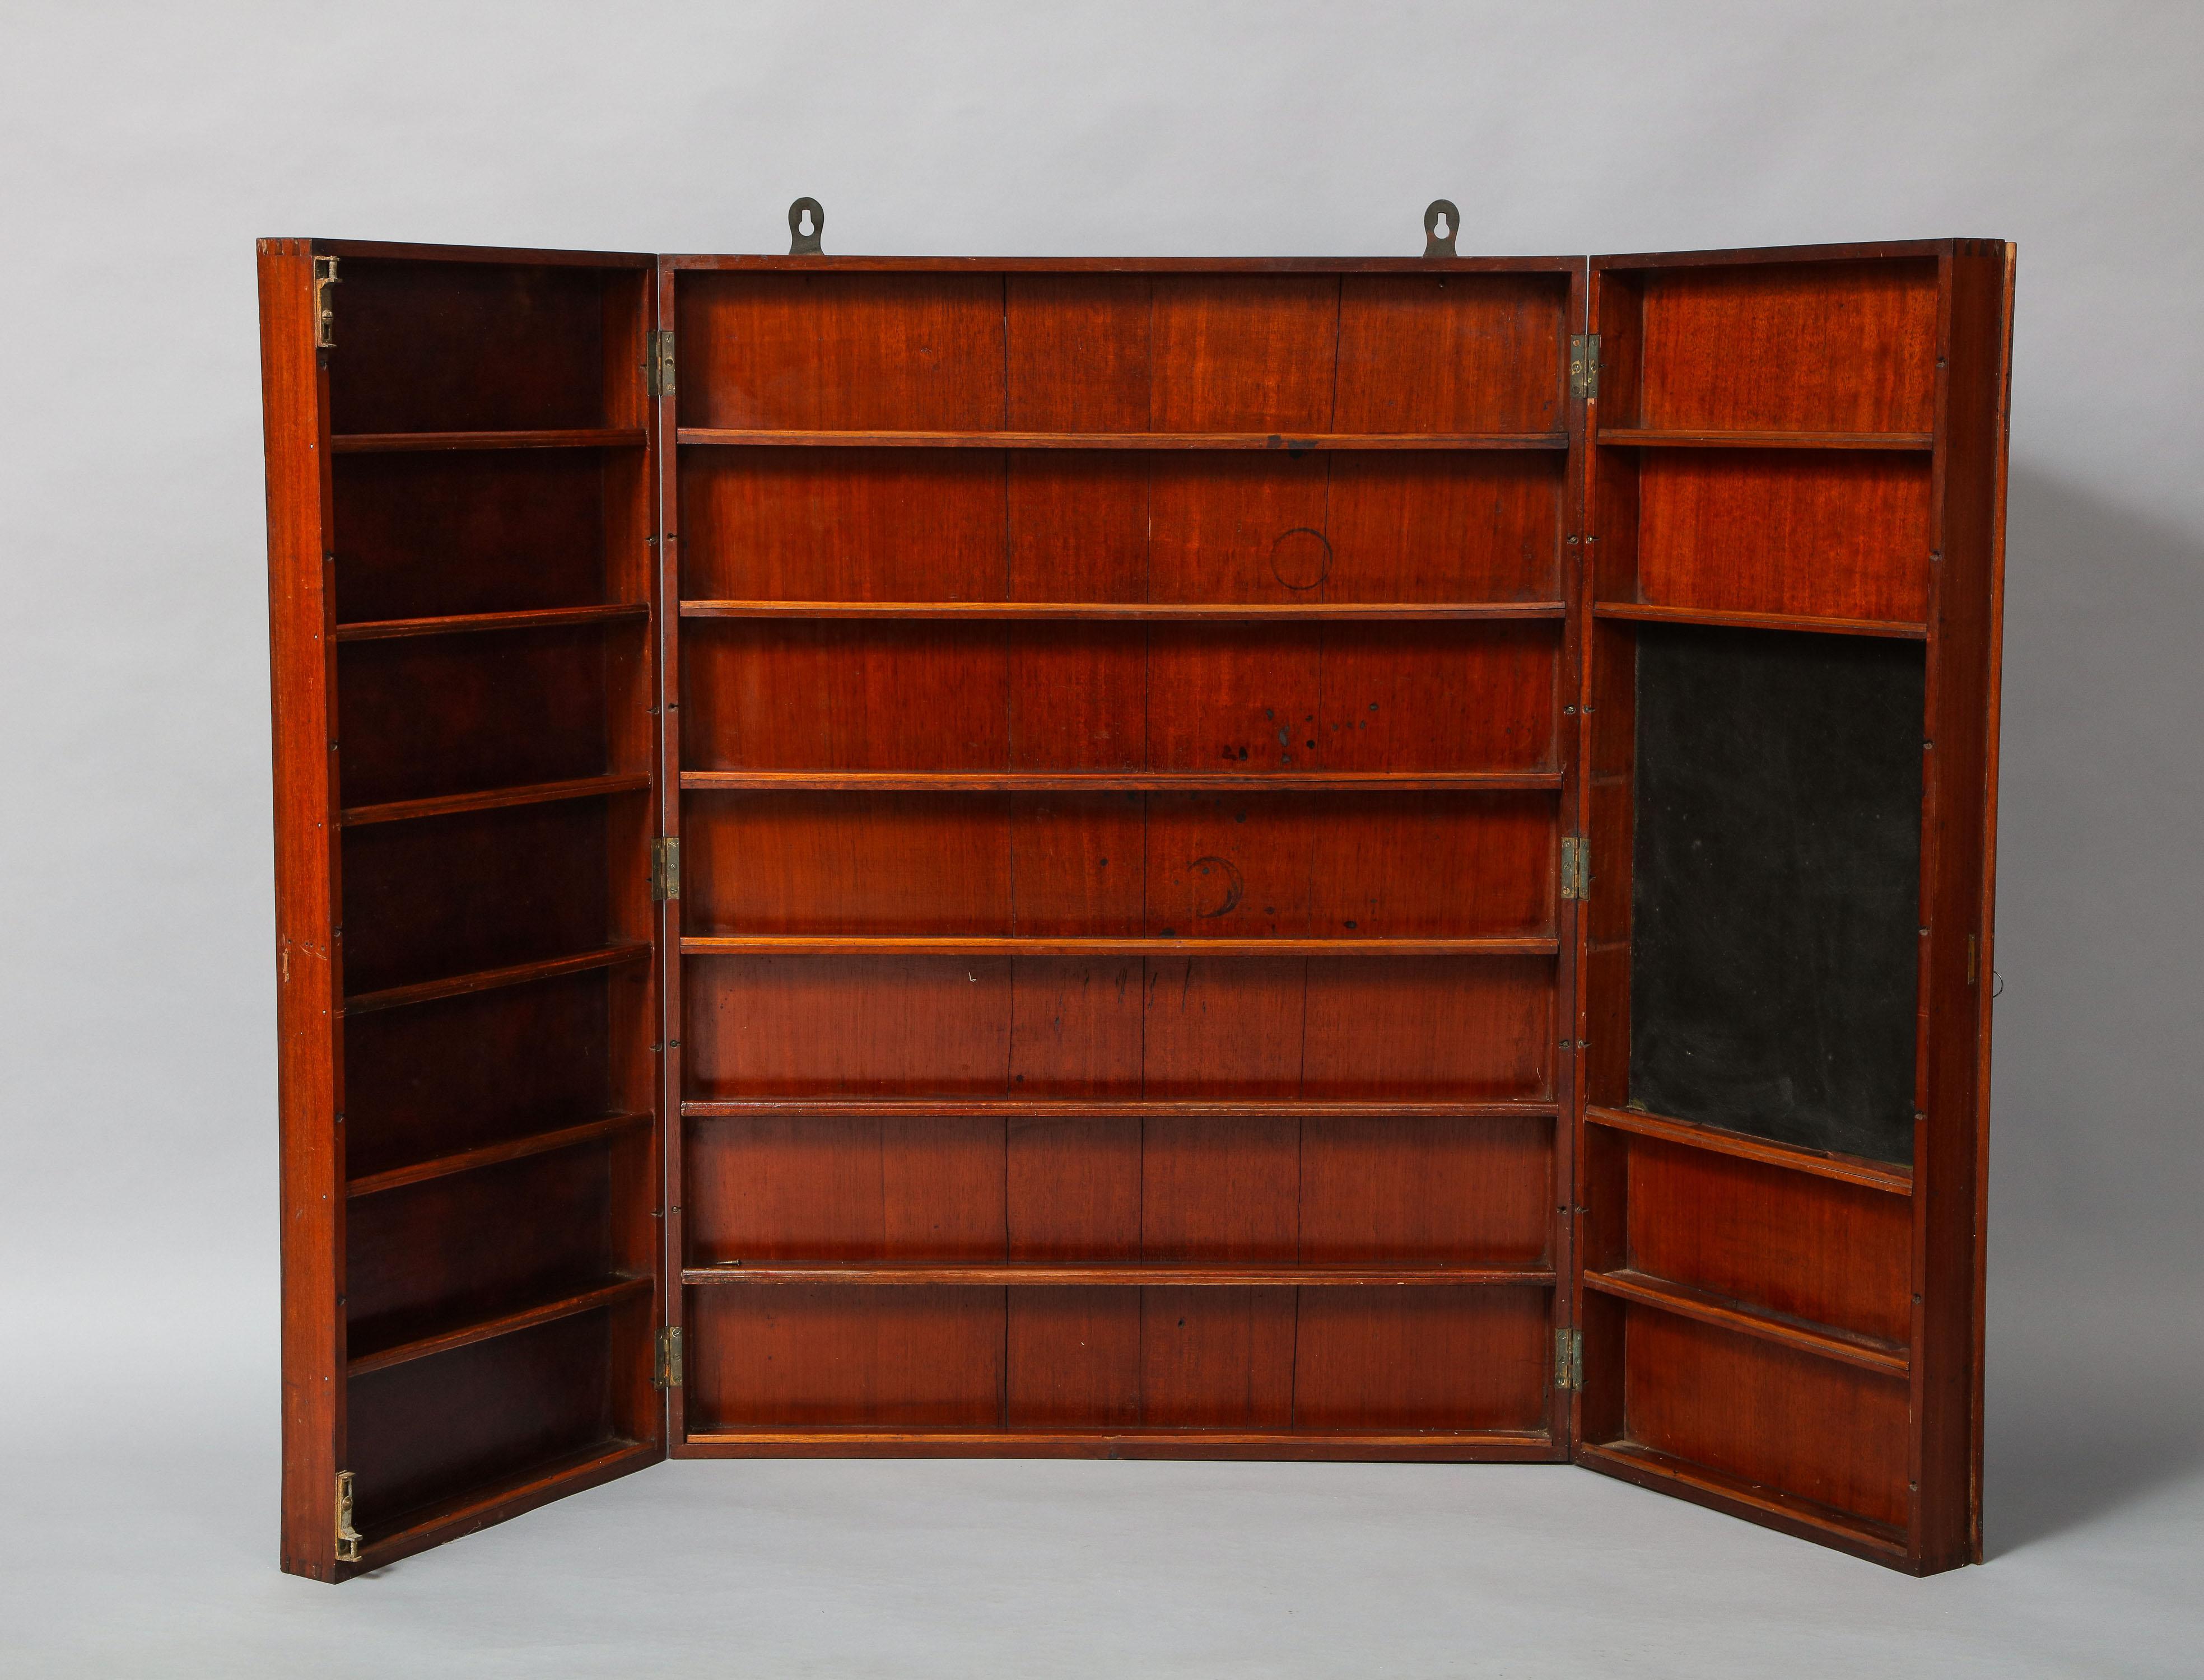 Rare Georgian mahogany campaign apothecary shelf/cabinet having two doors with half round molded edges, opening to reveal rows of fixed shelves and the right side additionally fitted with writing/mixing surface (presumably for use when not hanging!)